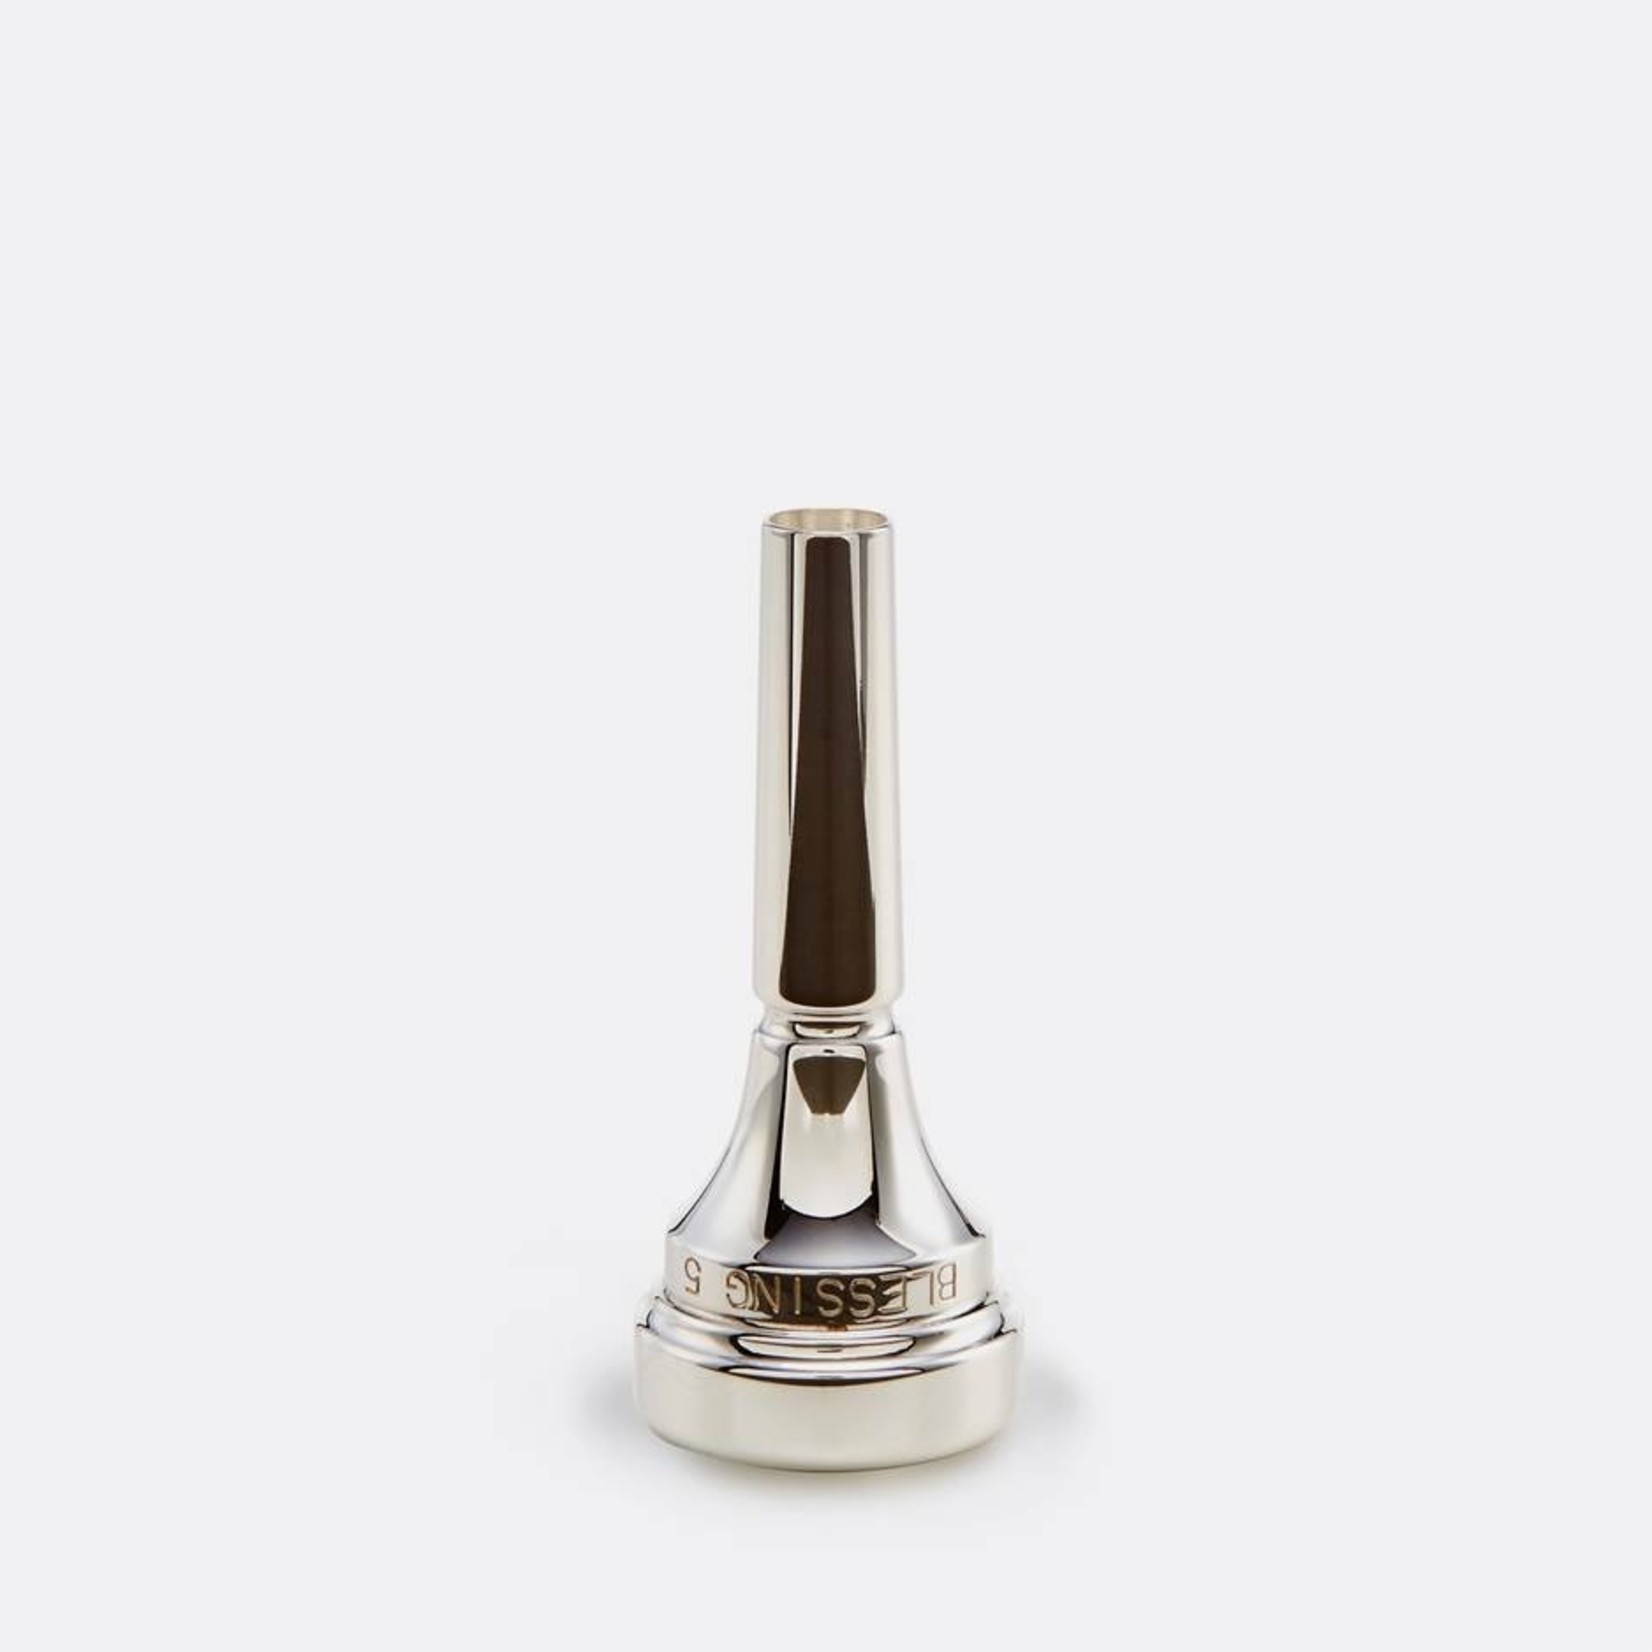 Blessing Blessing 5C Trumpet Mouthpiece